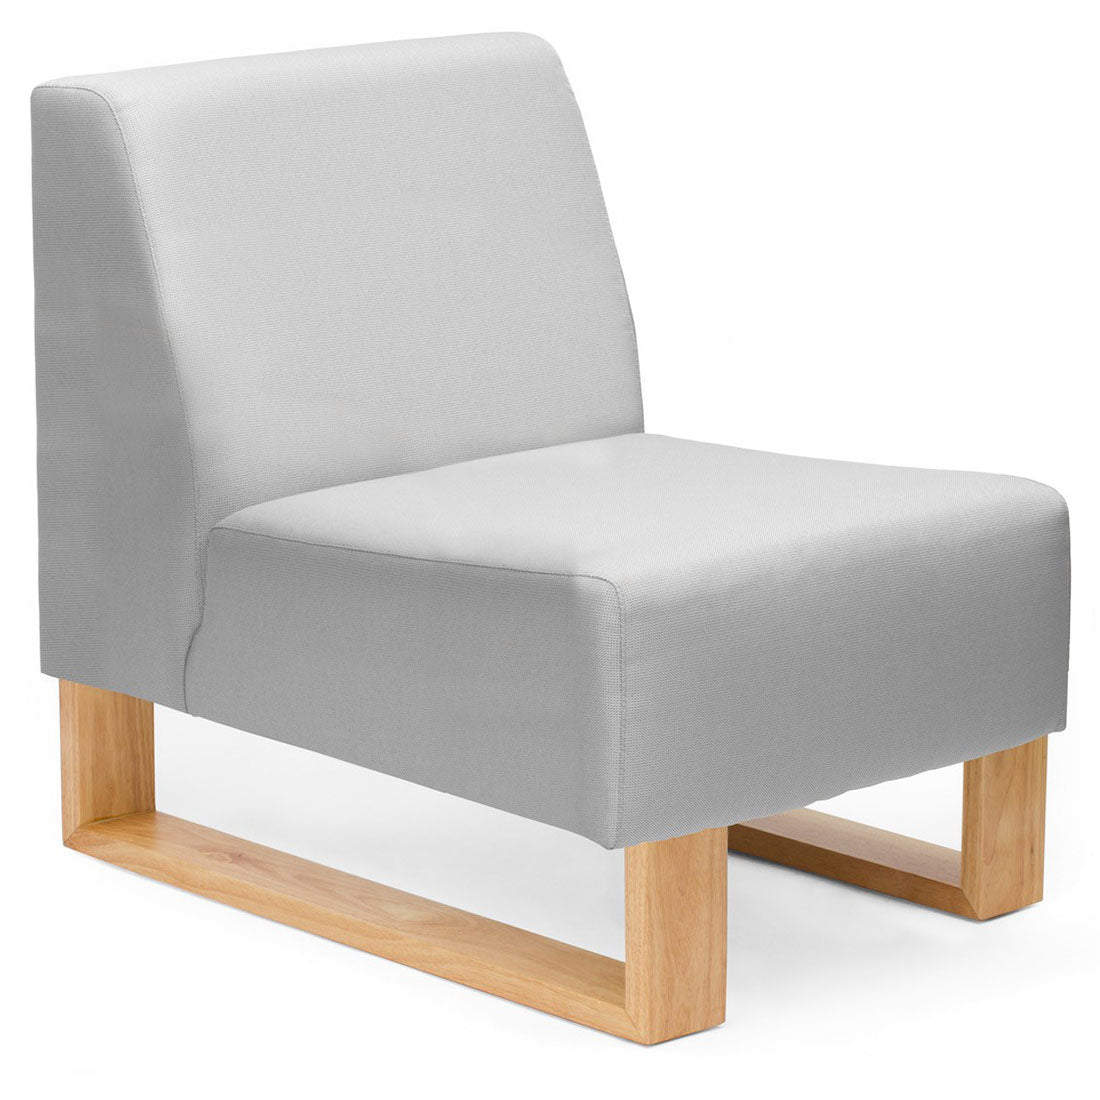 Highway Lounge Chair - switchoffice.com.au